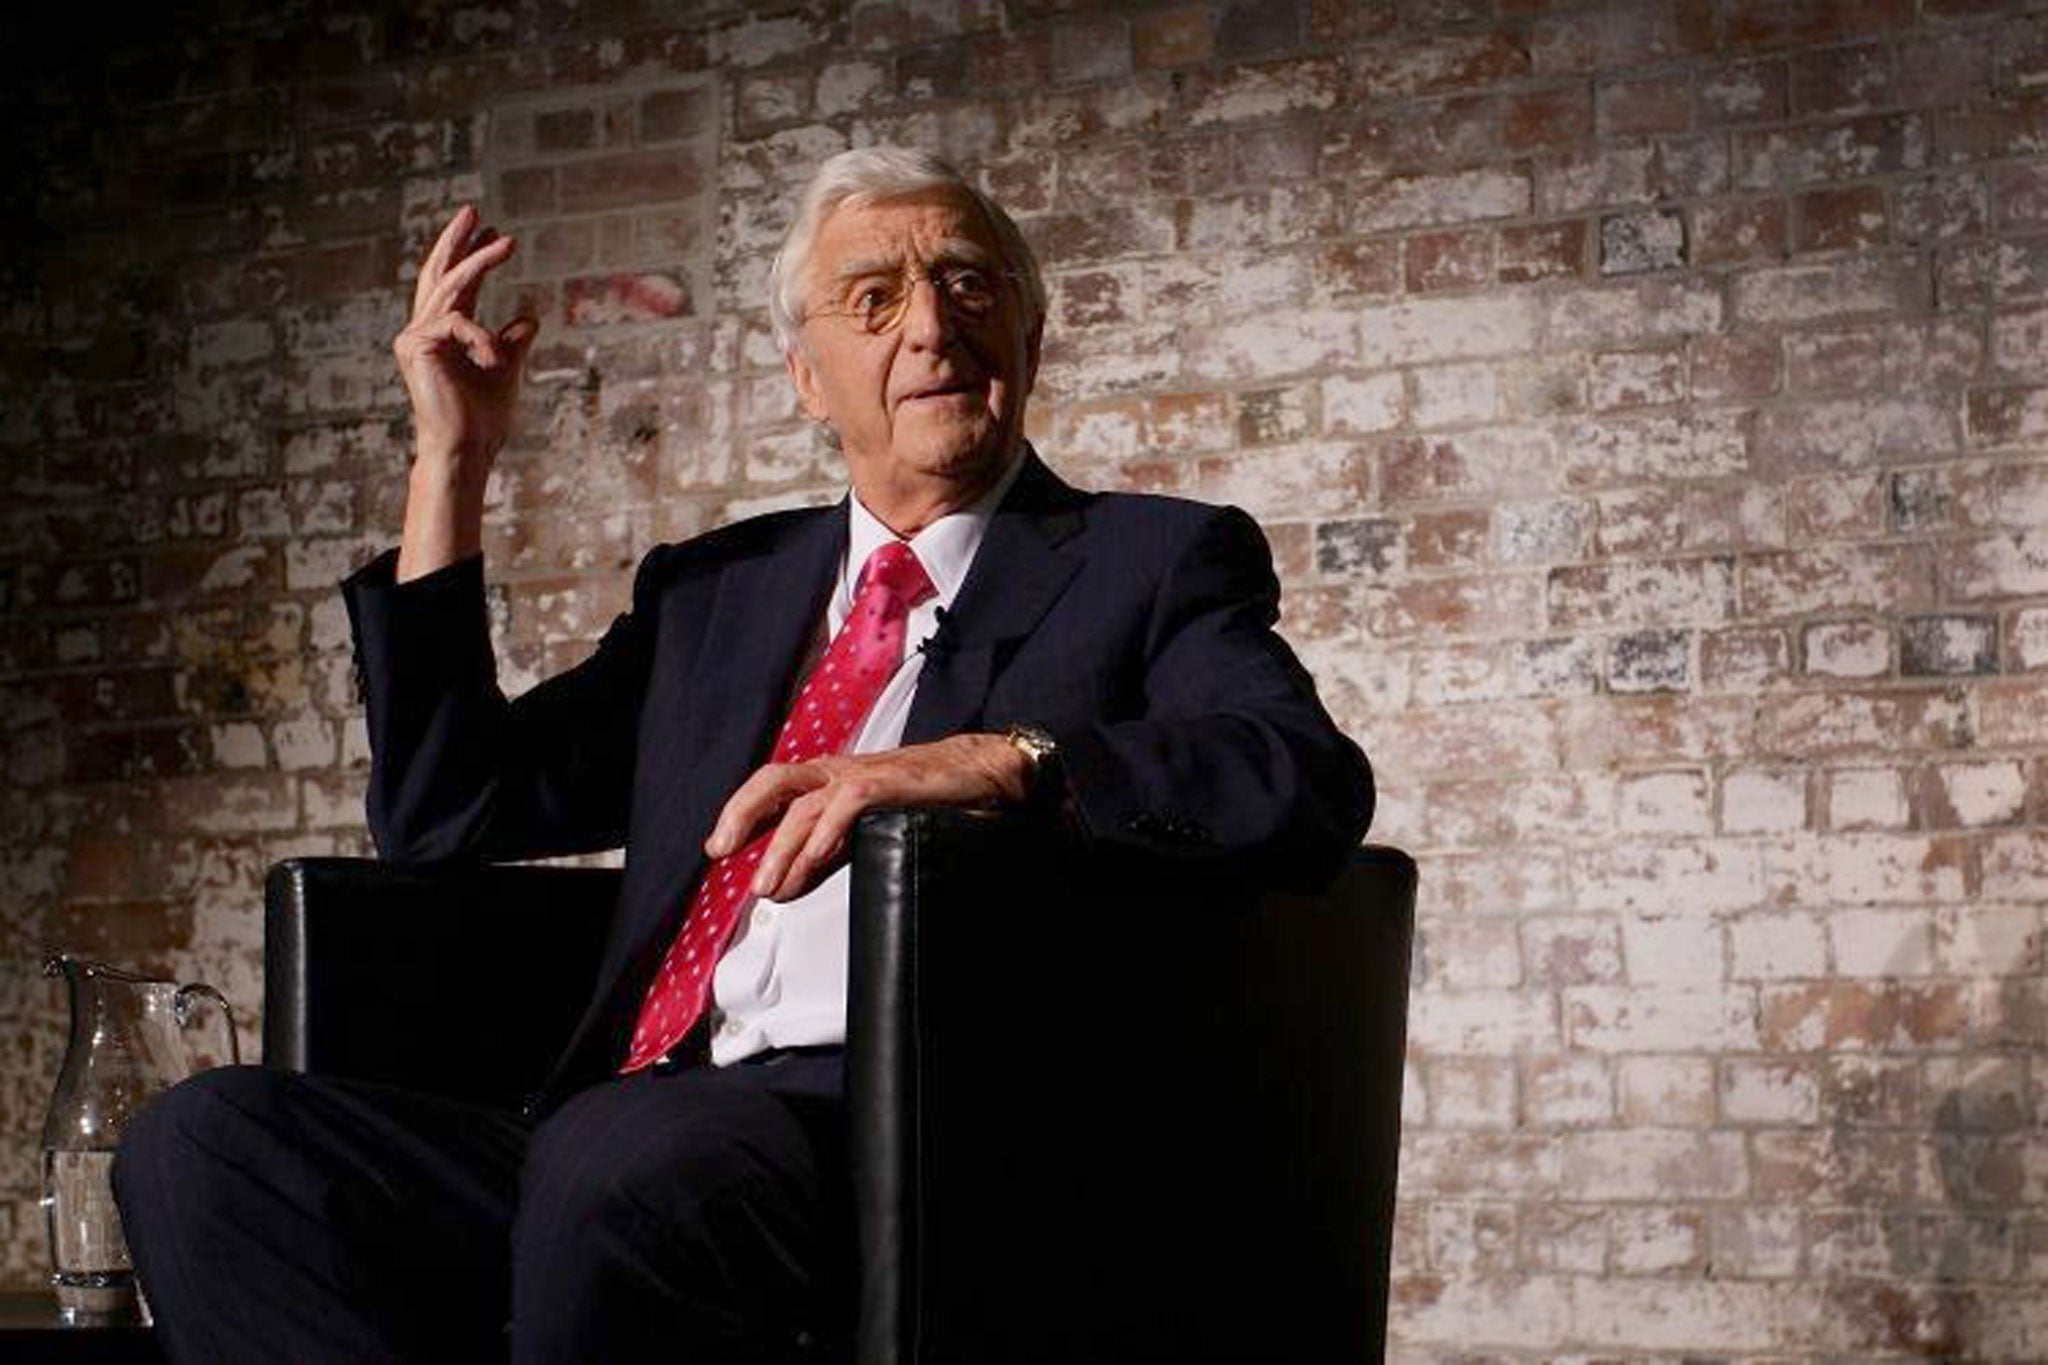 For years Sun Life used Michael Parkinson to flog dodgy over-50s insurance plans